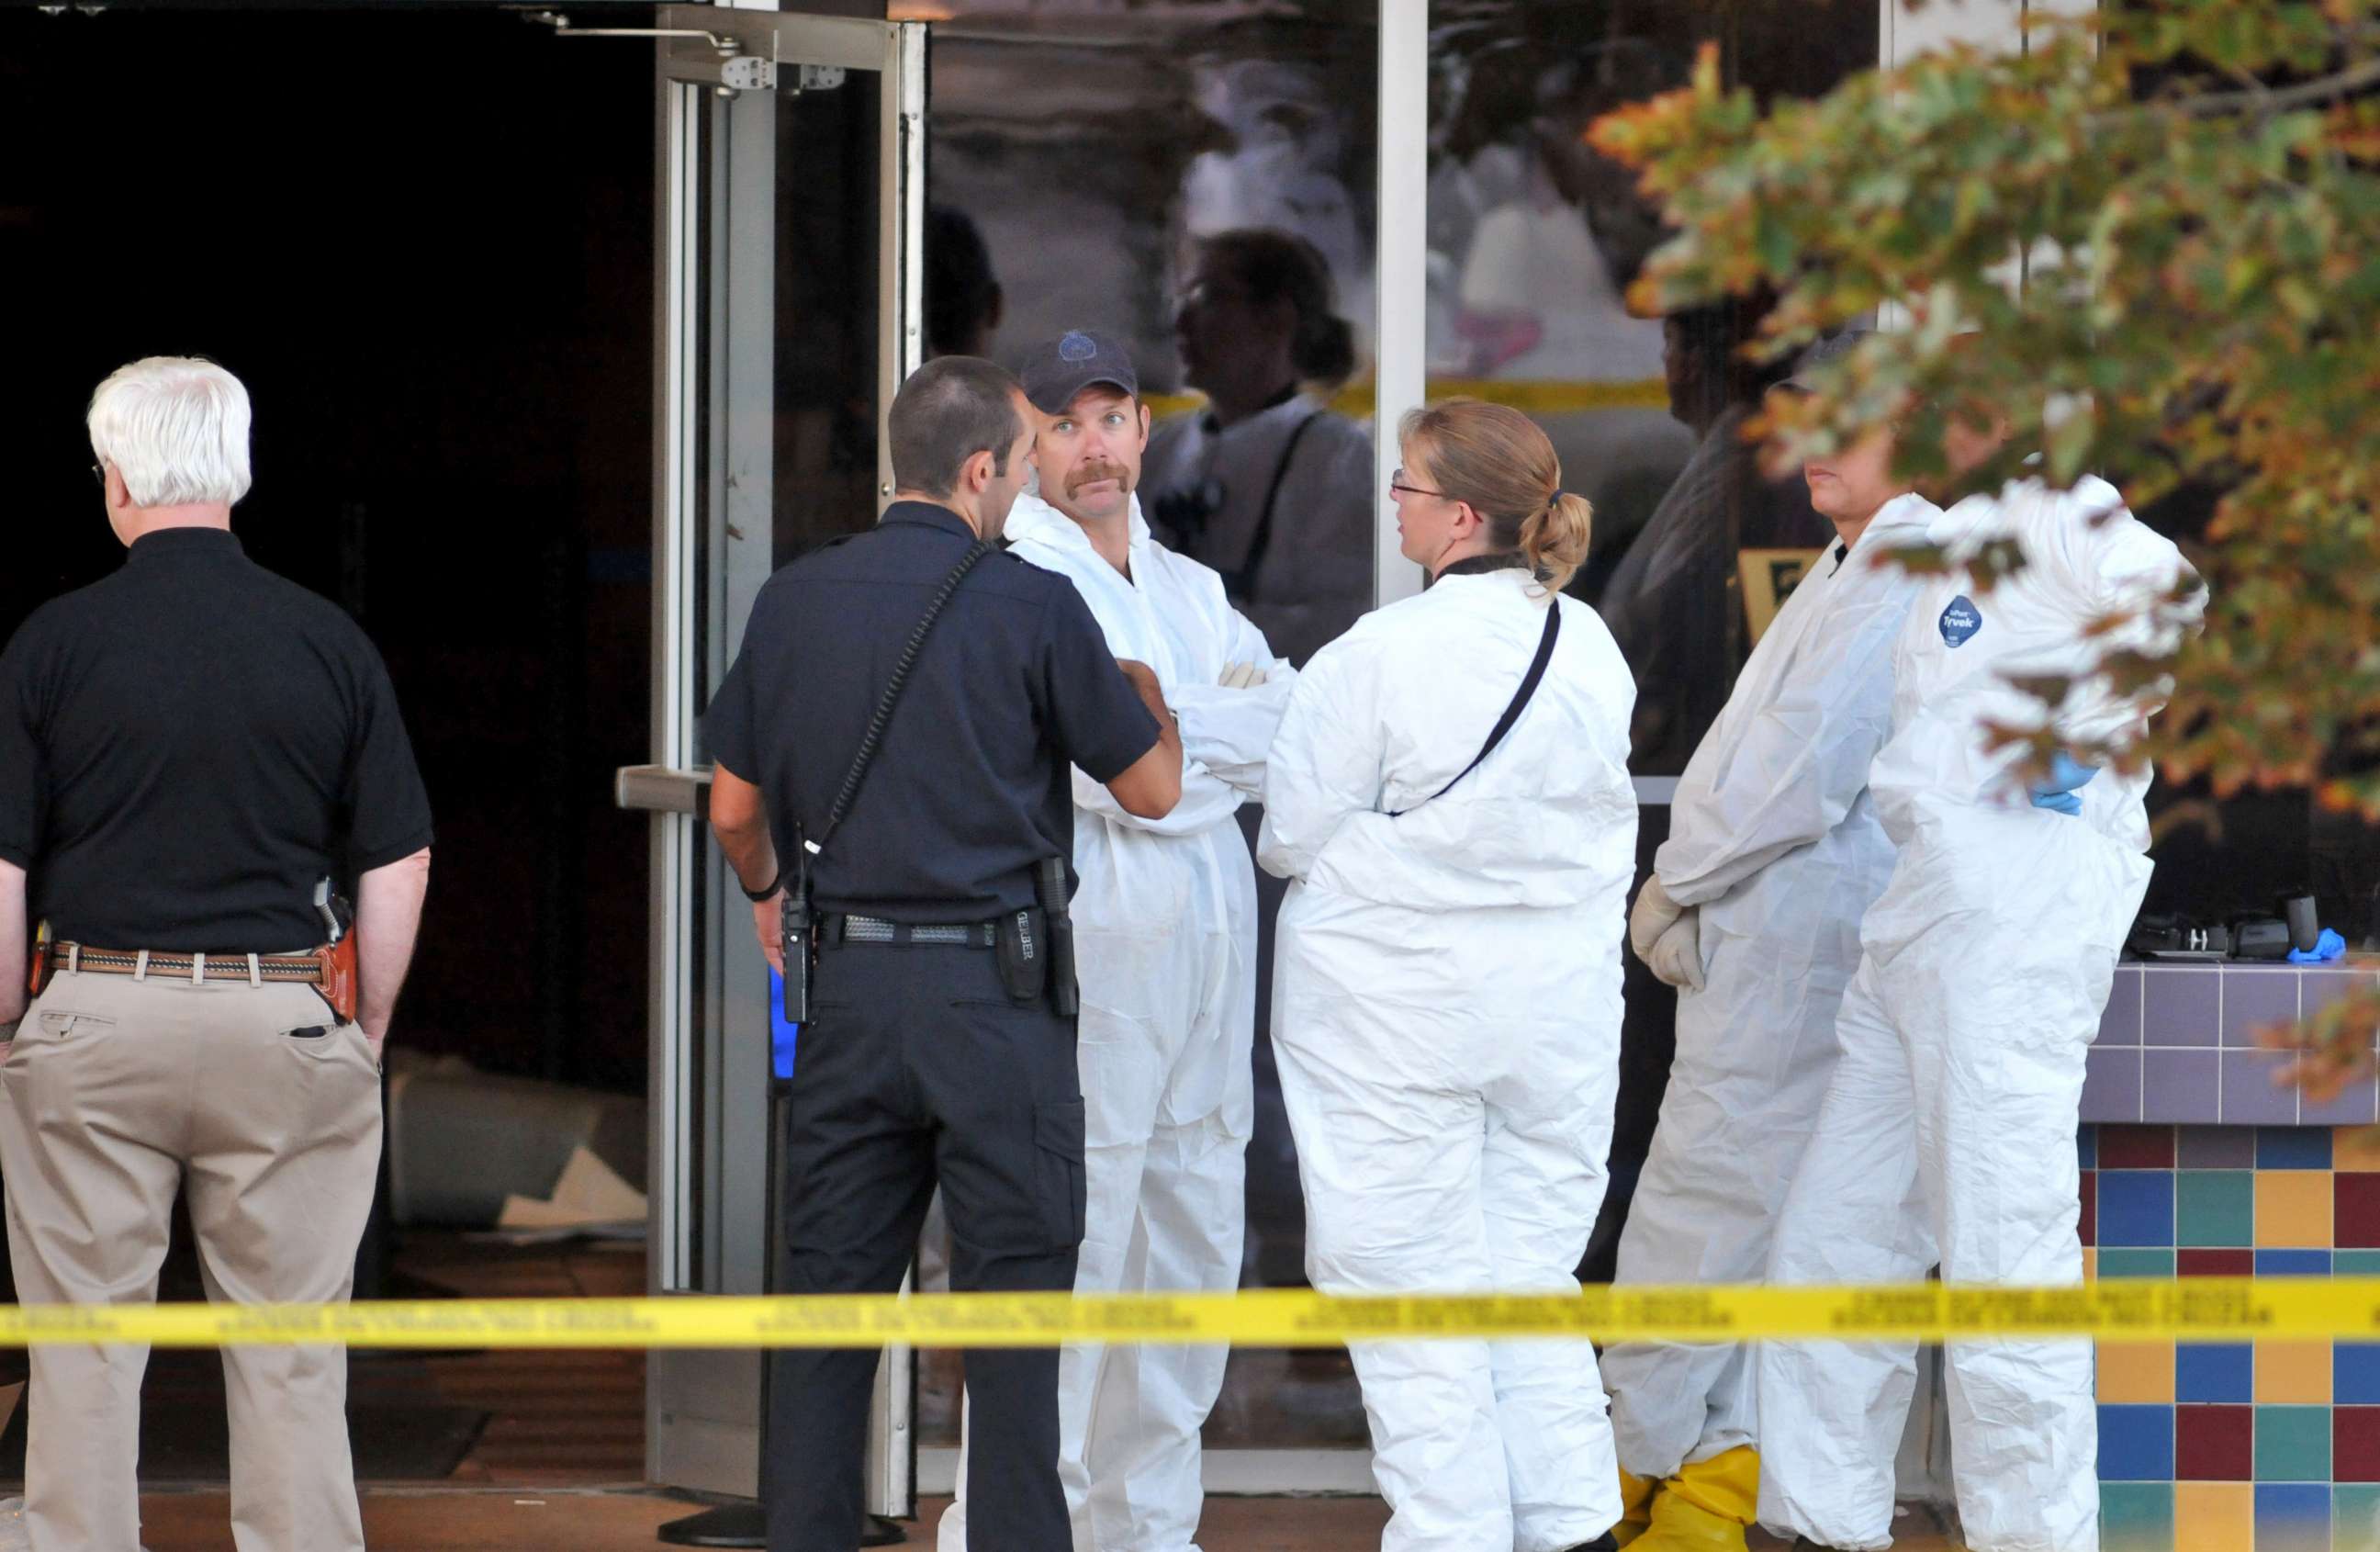 PHOTO: Investigators are on the scene at the Century 16 movie theatre where a gunmen attacked movie goers during an early morning screening of "The Dark Knight Rises," July 20, 2012, in Aurora, Colorado.